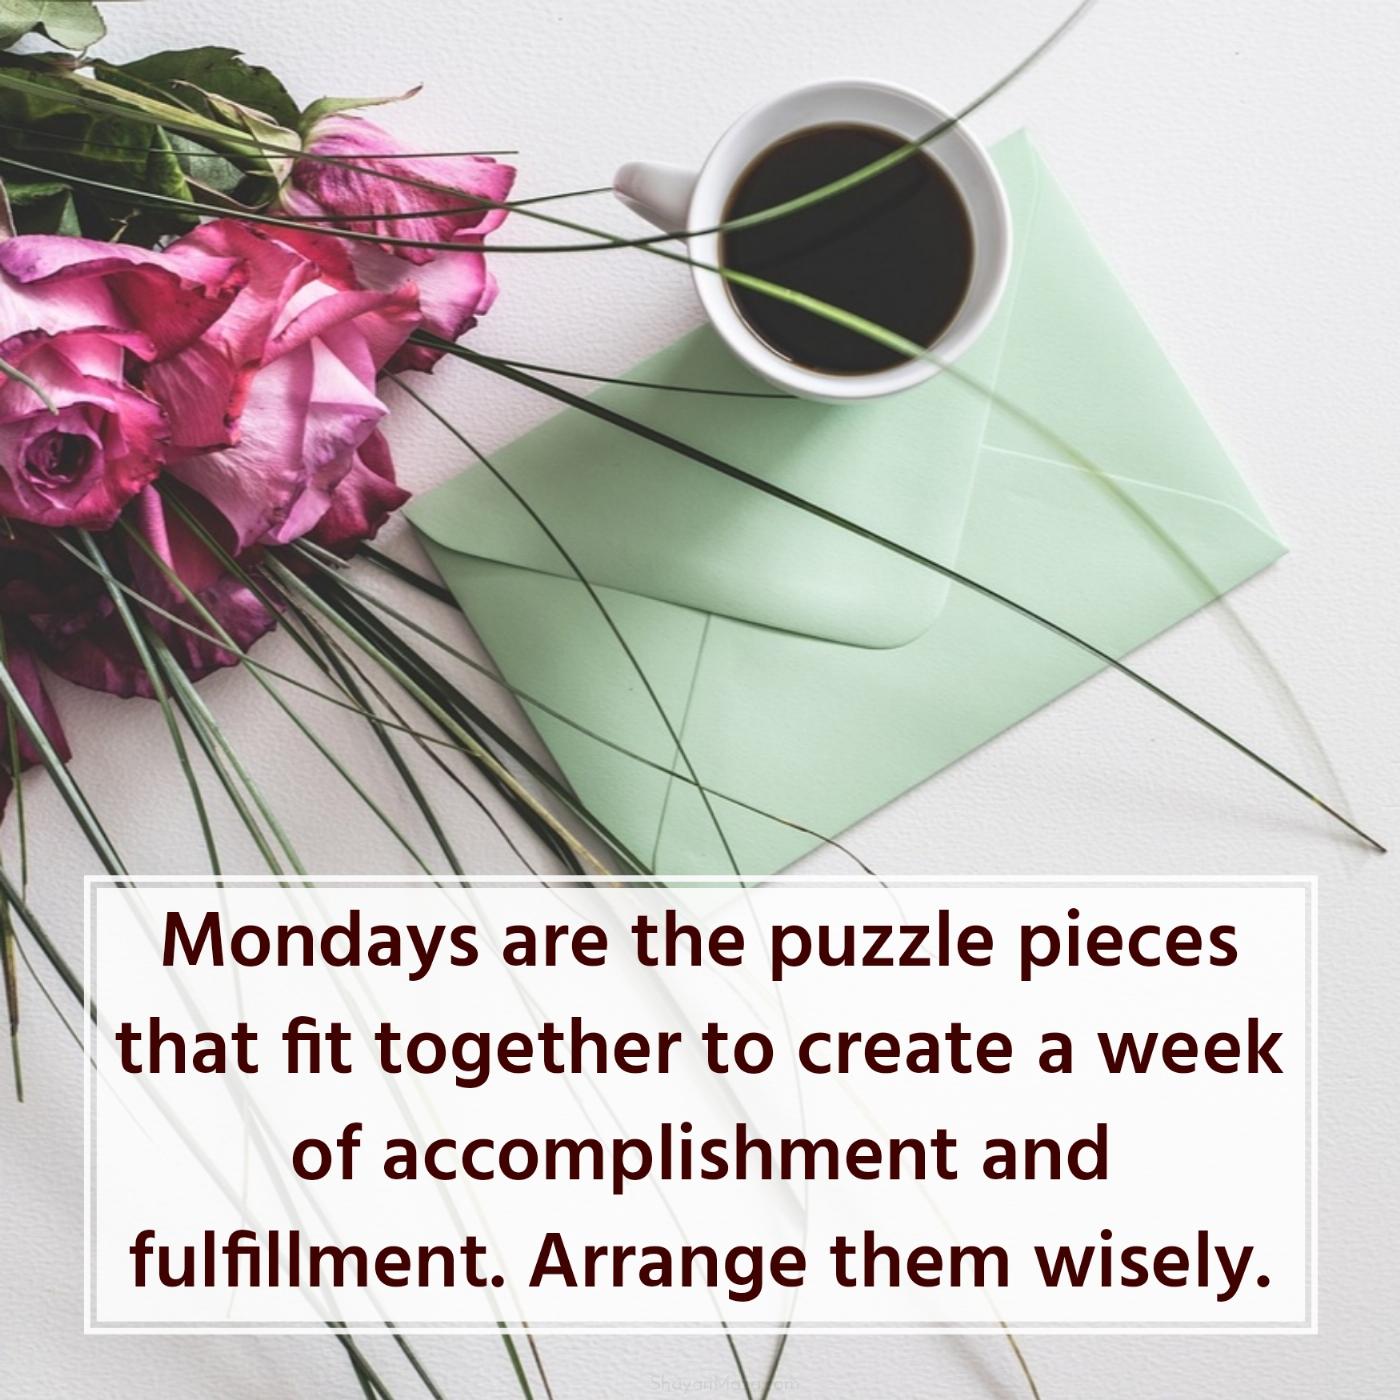 Mondays are the puzzle pieces that fit together